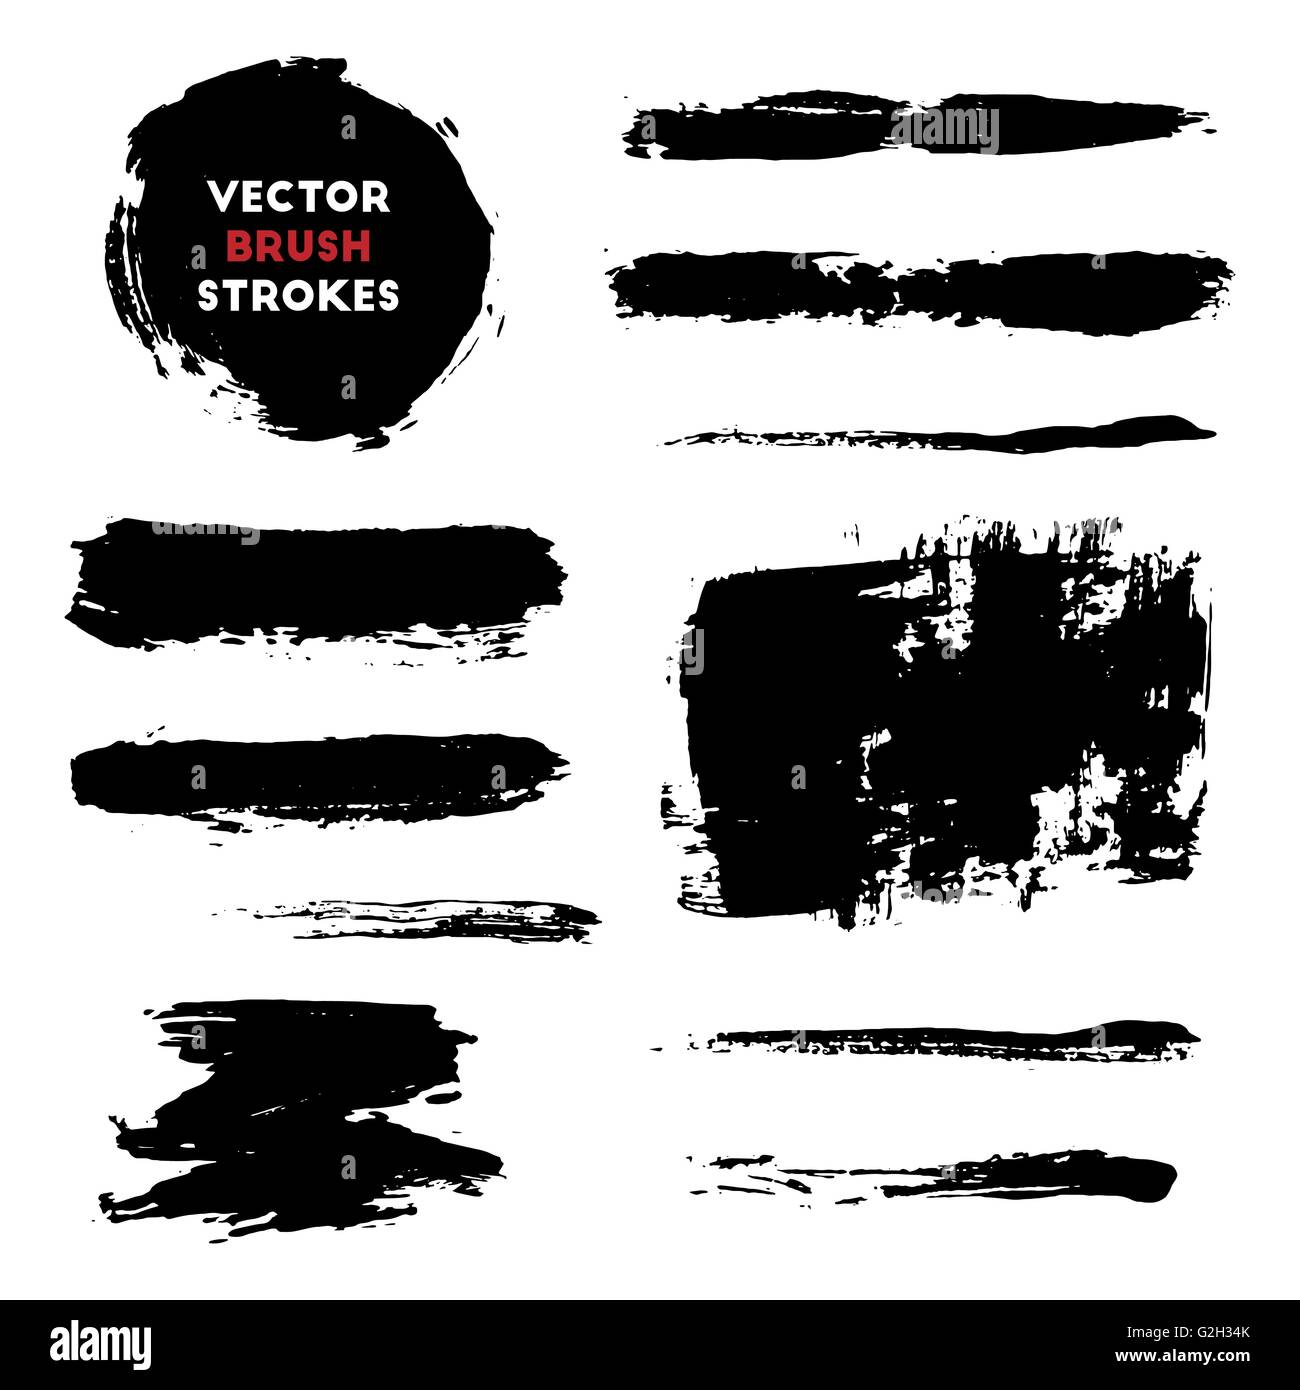 Vector illustration of brush strokes collection. Grunge brushstrokes set. Paint stains. Different grunge black brush strokes Stock Vector